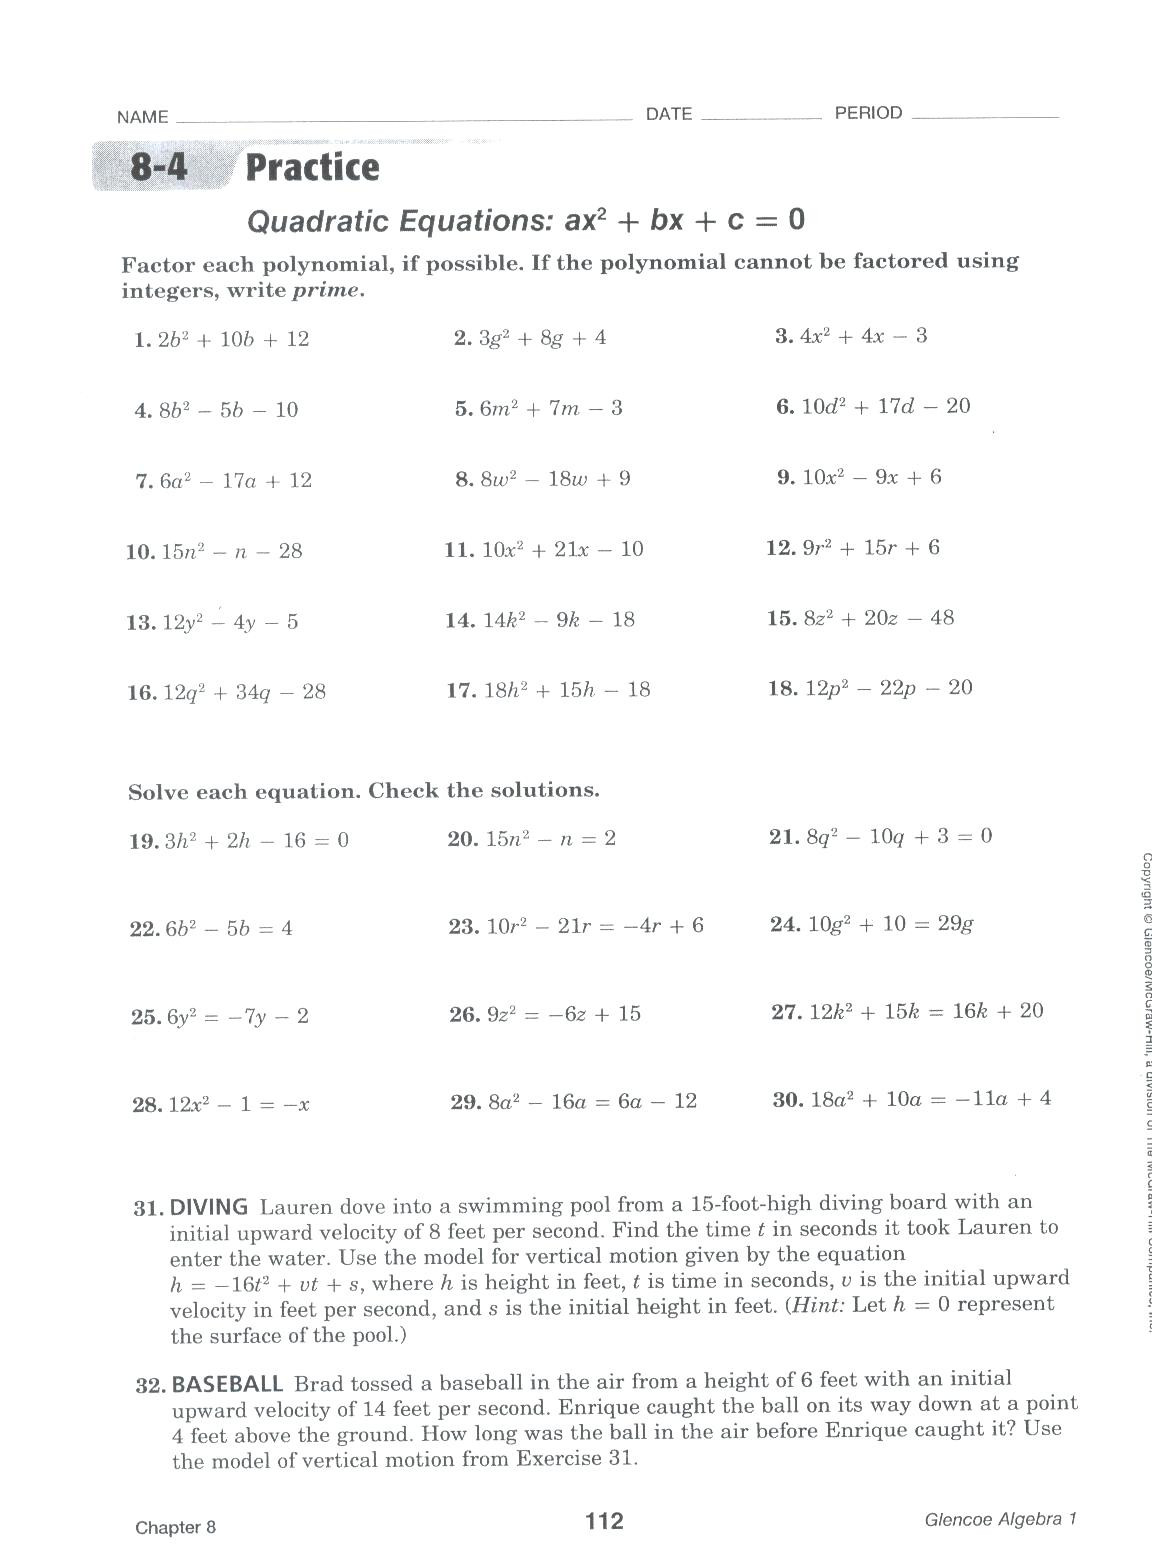 Completing the Square Practice Worksheet 10 3 Skills Practice solving Quadratic Equations by